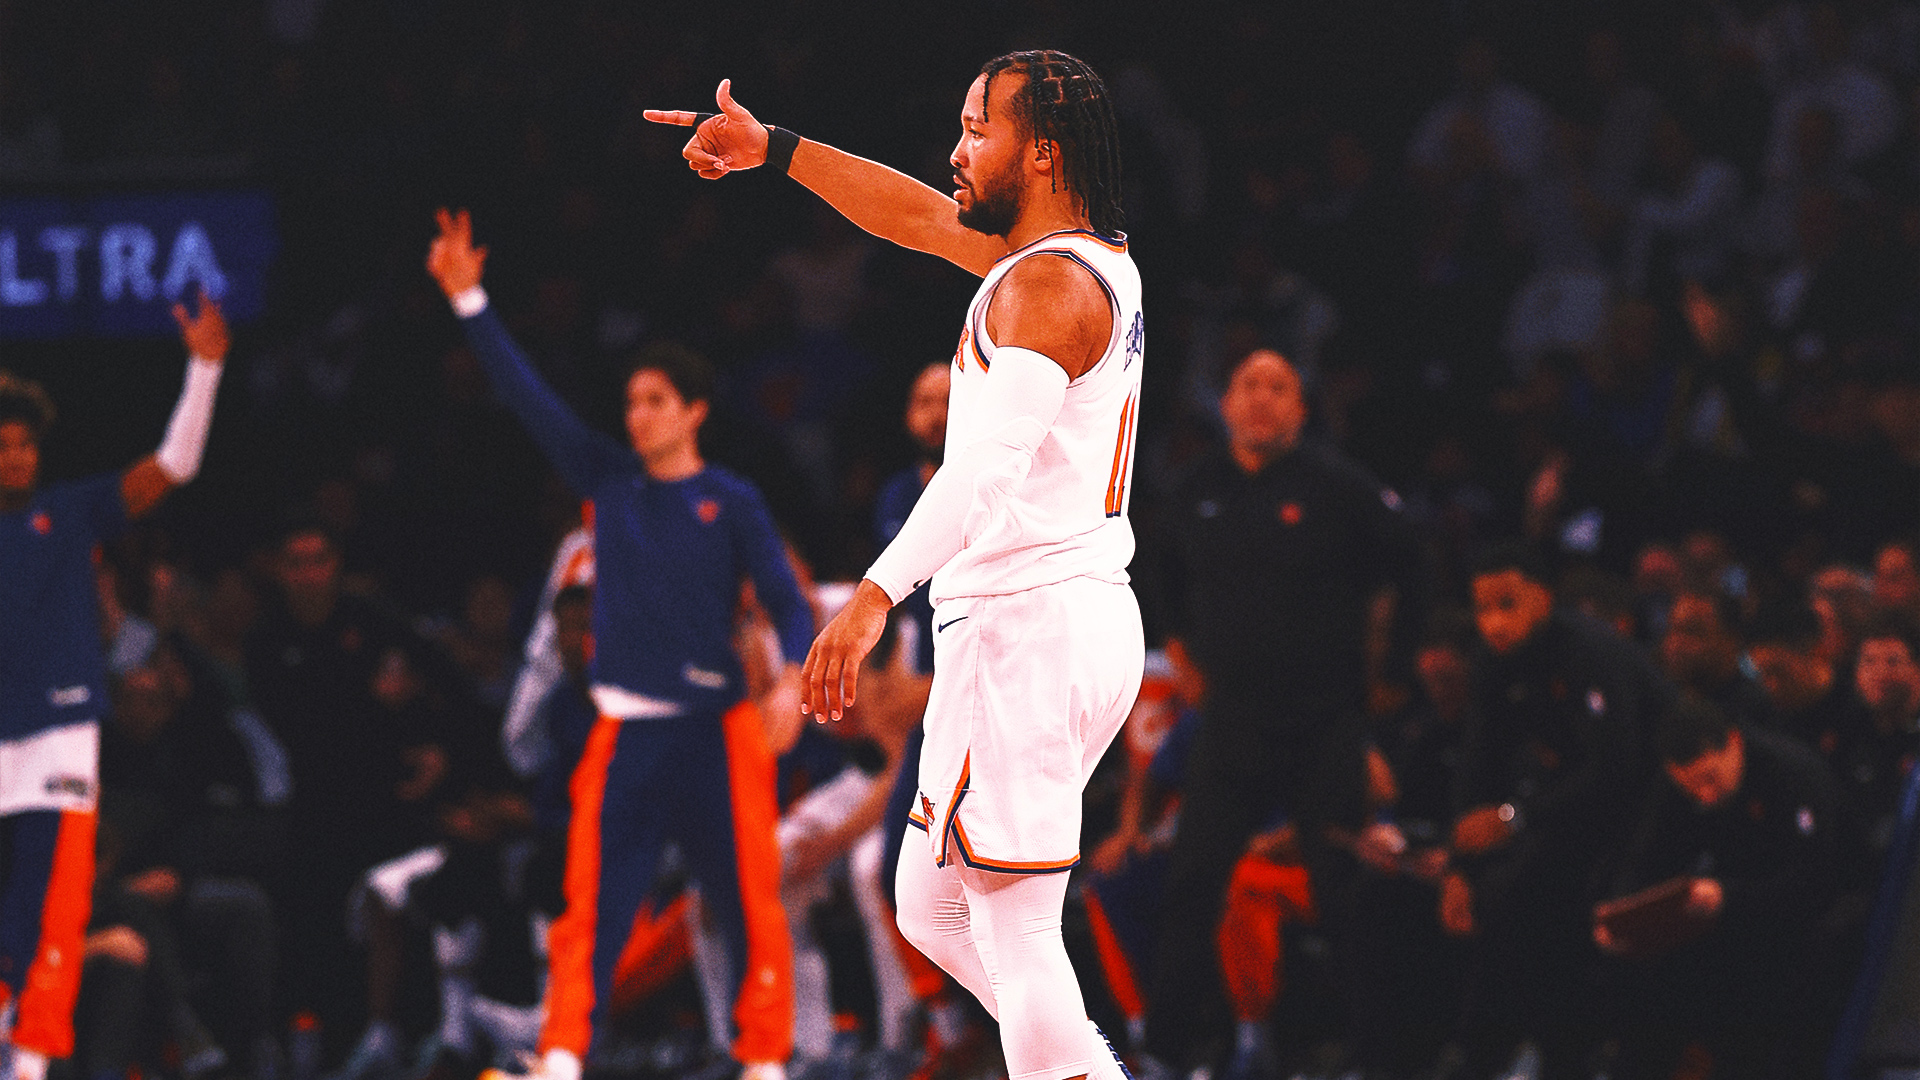 Jalen Brunson scores career-high 50, hits all nine of his 3-point shots as Knicks top Suns 139-122